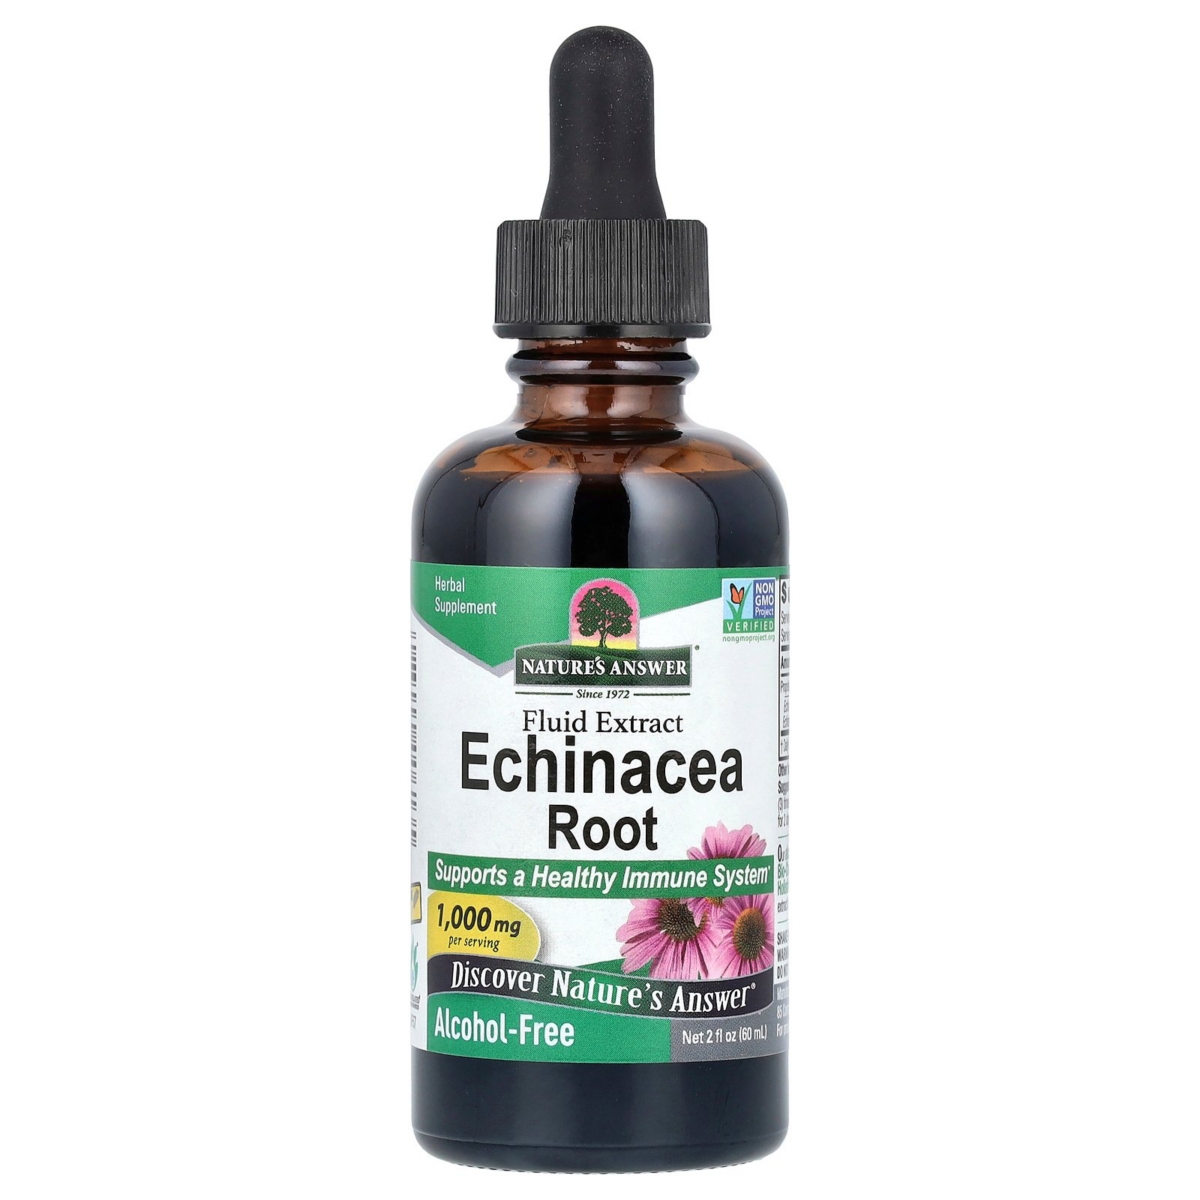 Echinacea Root Fluid Extract Alcohol-Free 1 000 mg - 2 fl oz (60 ml) - Assorted Pre-pack (See Table